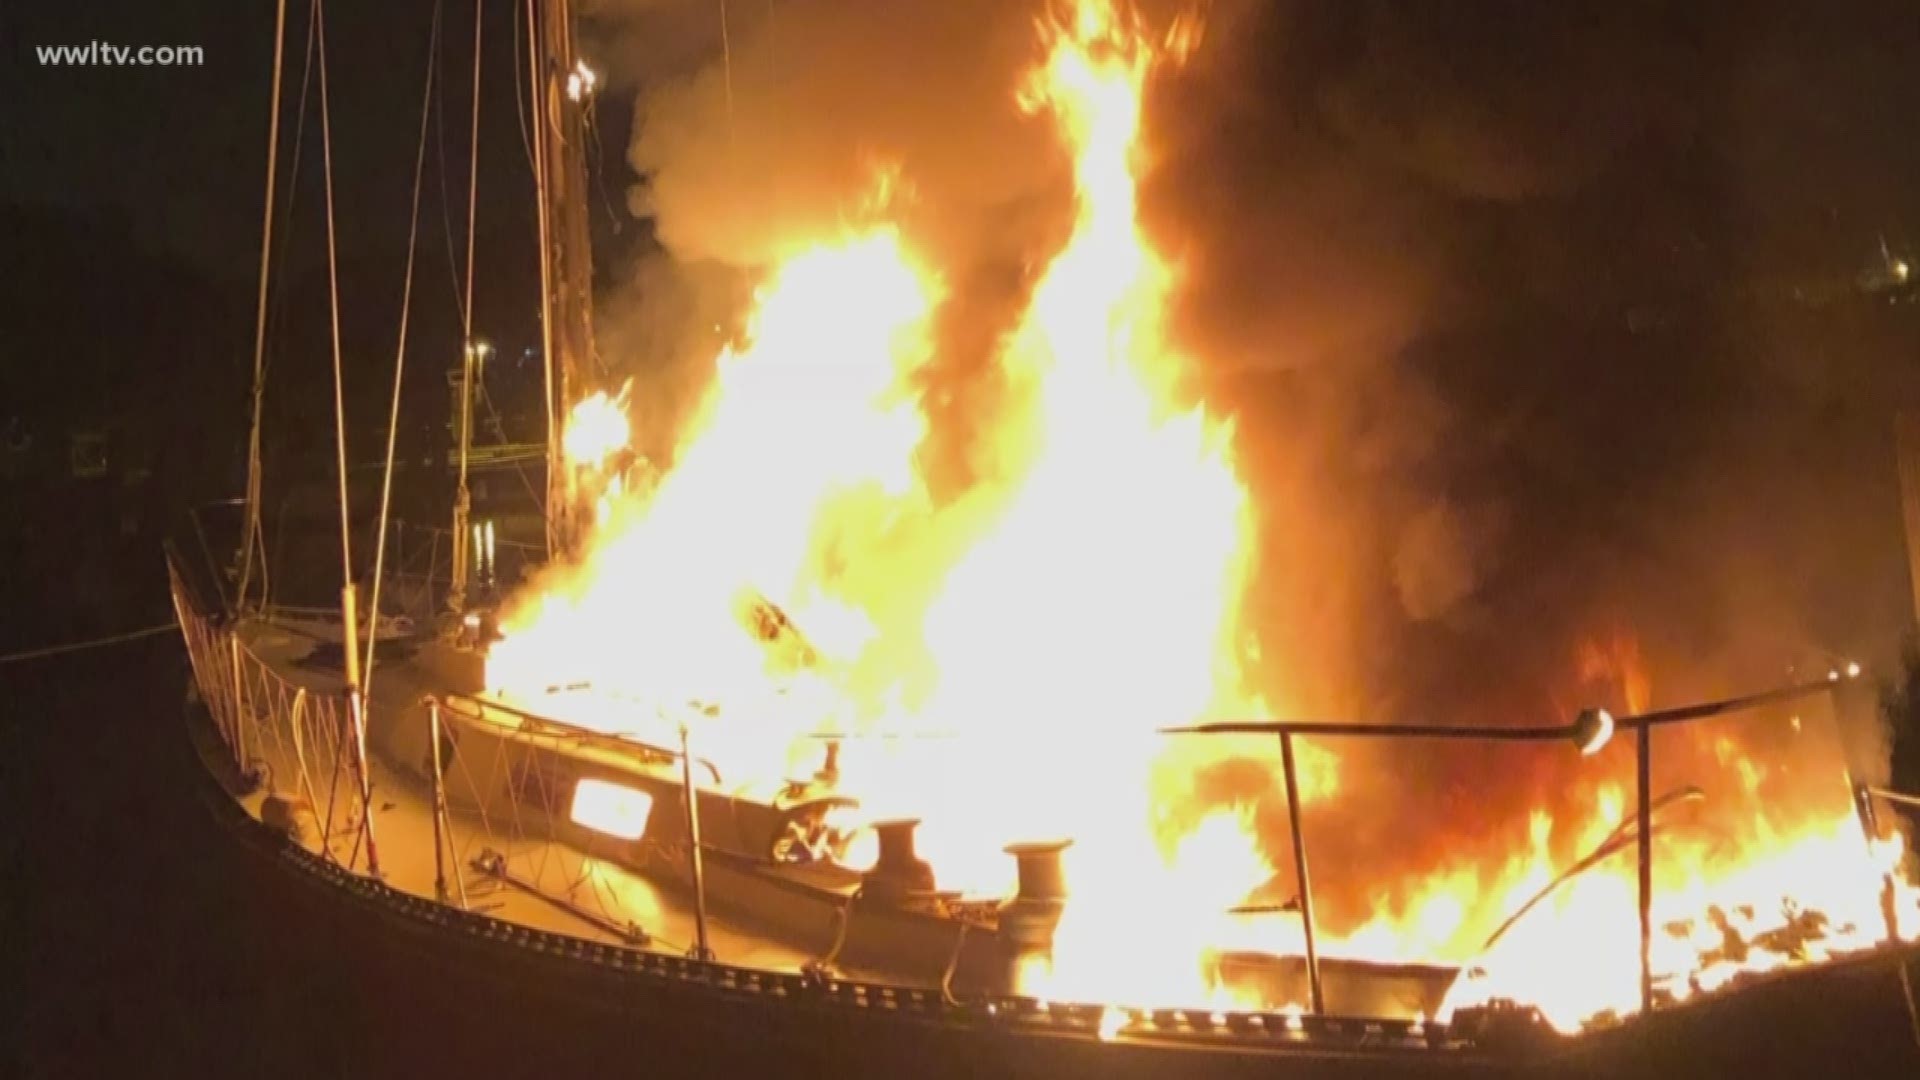 Fire breaks out overnight at yacht harbor